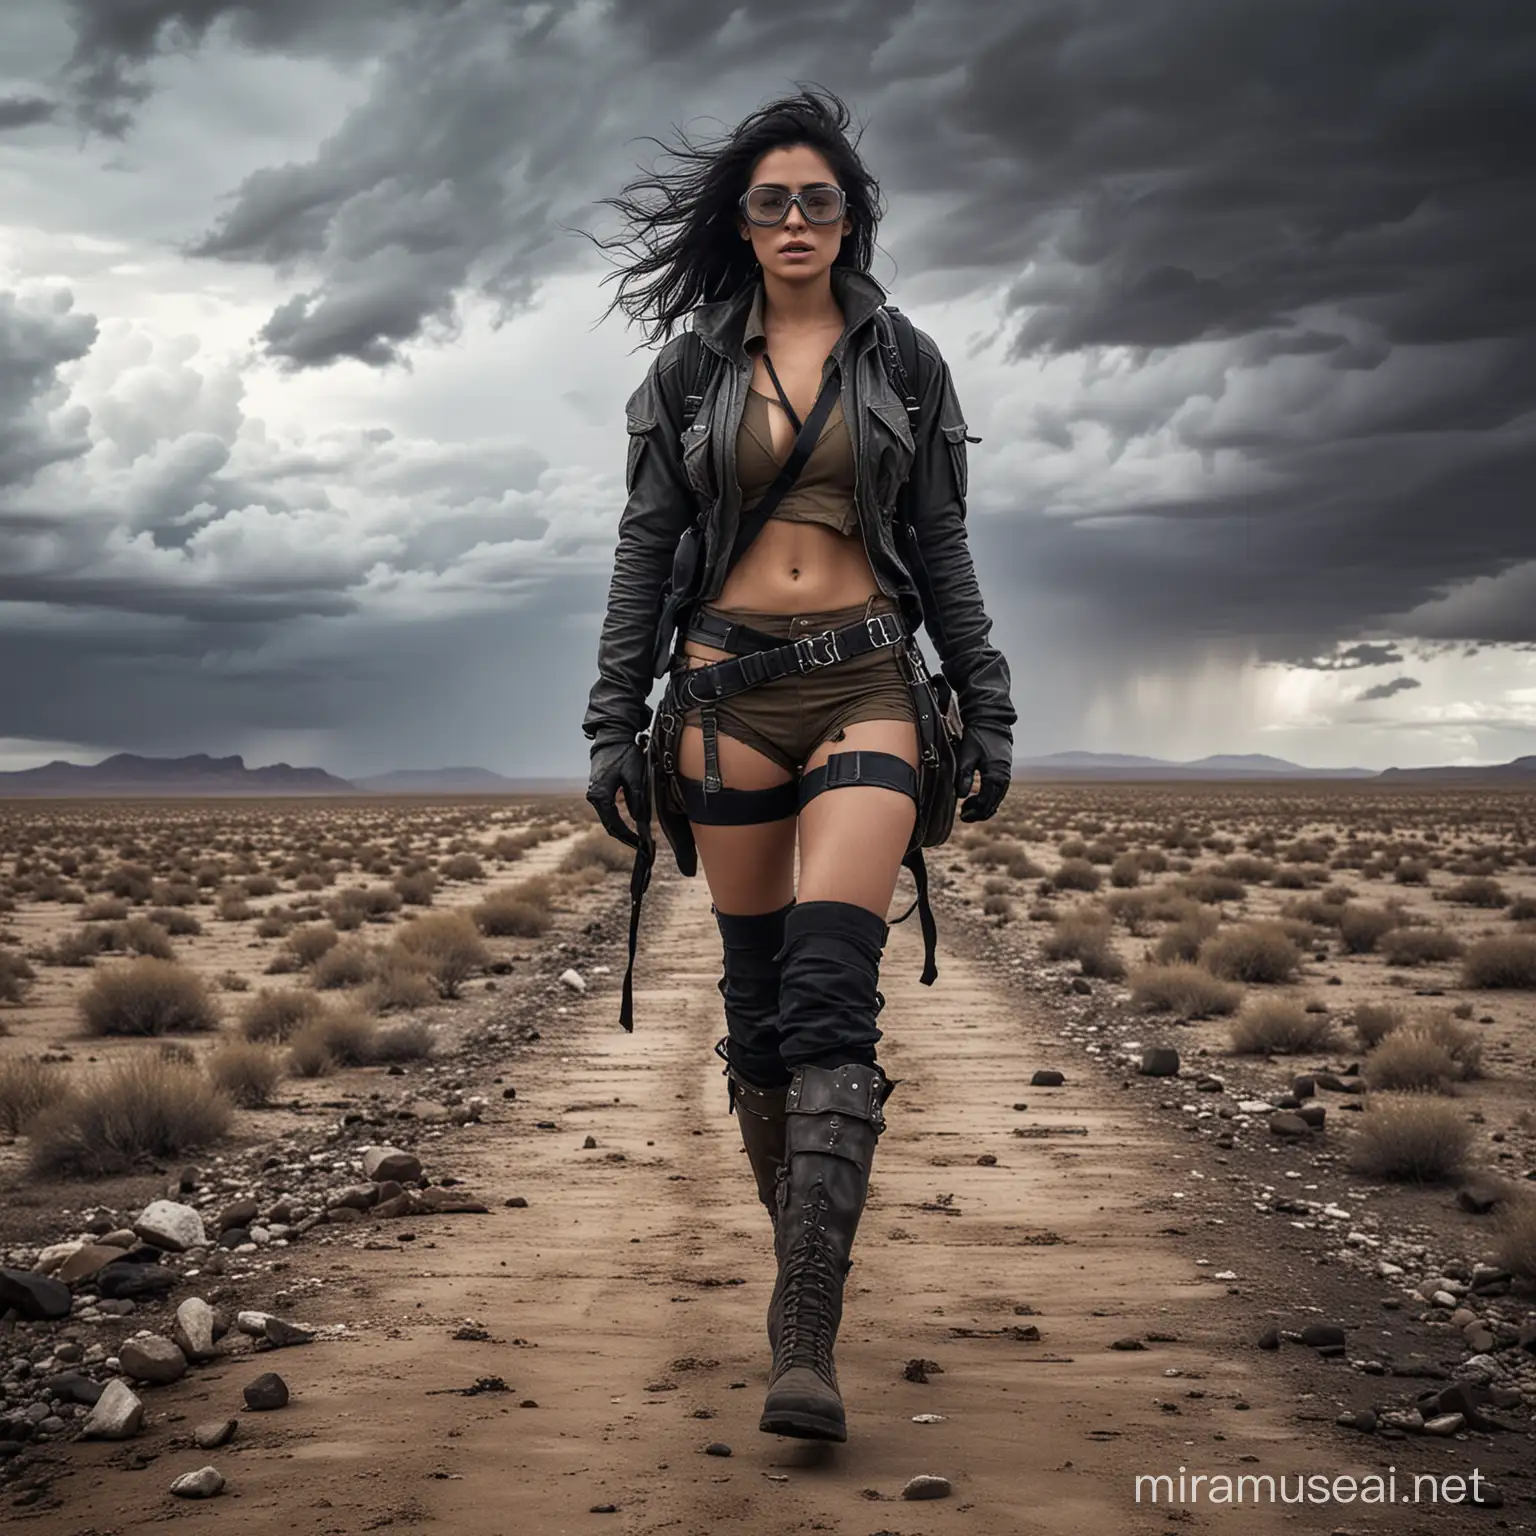 Create the journey of a lone, weathered seductive female beautiful nomad traversing a vast, desolate wasteland. They carry a full backpack, walking through a harsh, gritty landscape, as distant storm clouds threaten further chaos.  Wearing combat boots, thigh high stockings, goggles, black hair